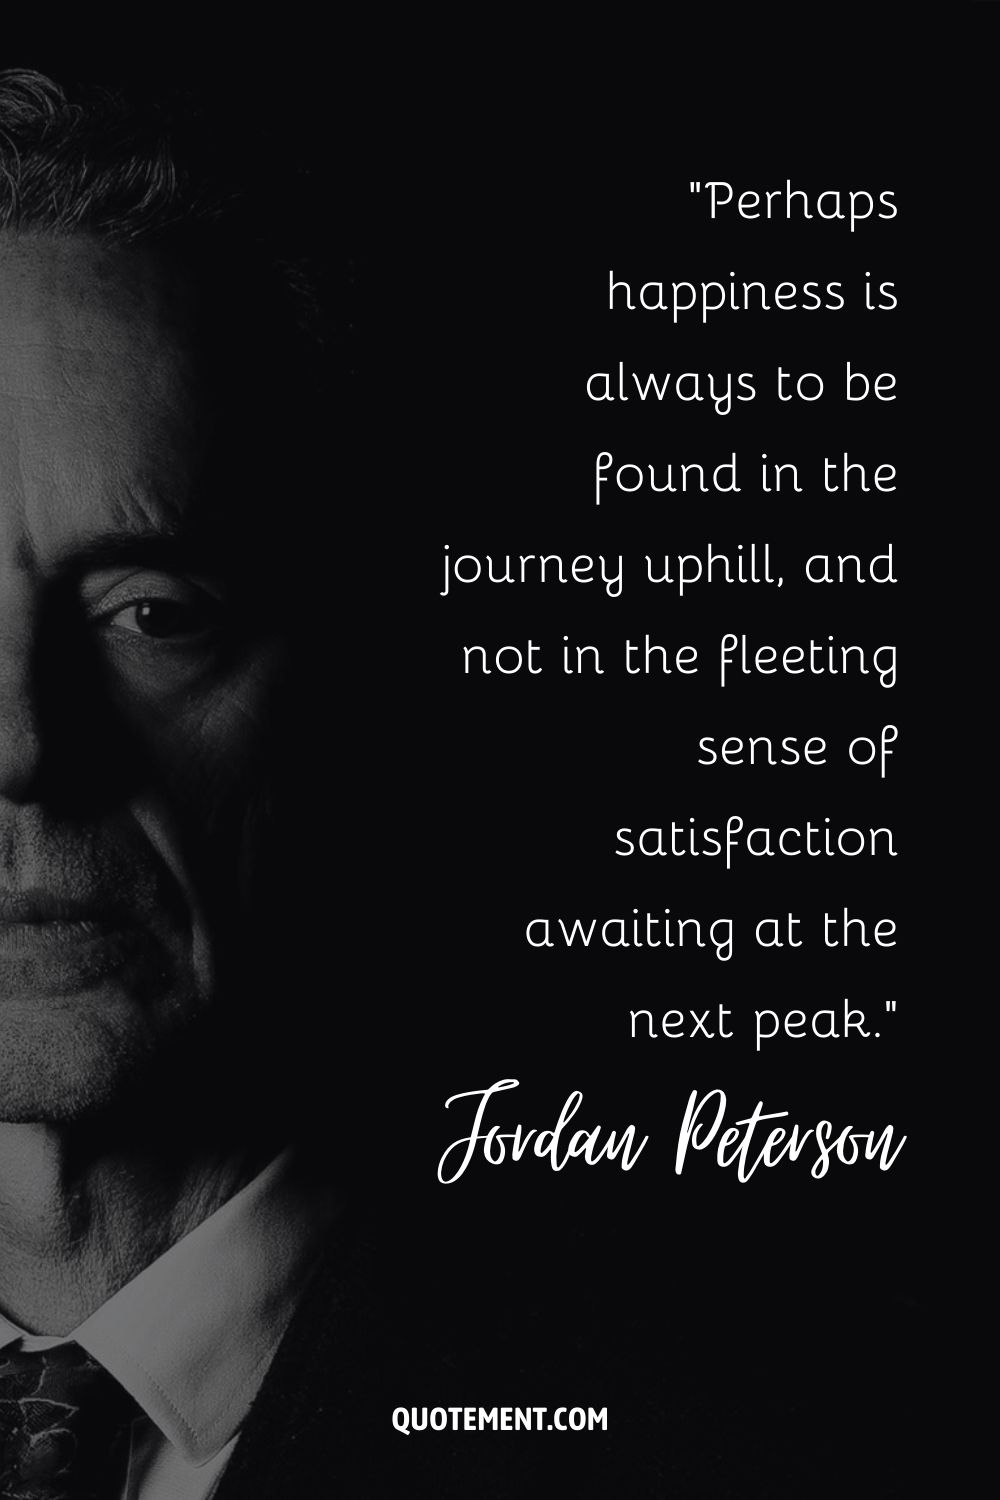 Perhaps happiness is always to be found in the journey uphill, and not in the fleeting sense of satisfaction awaiting at the next peak